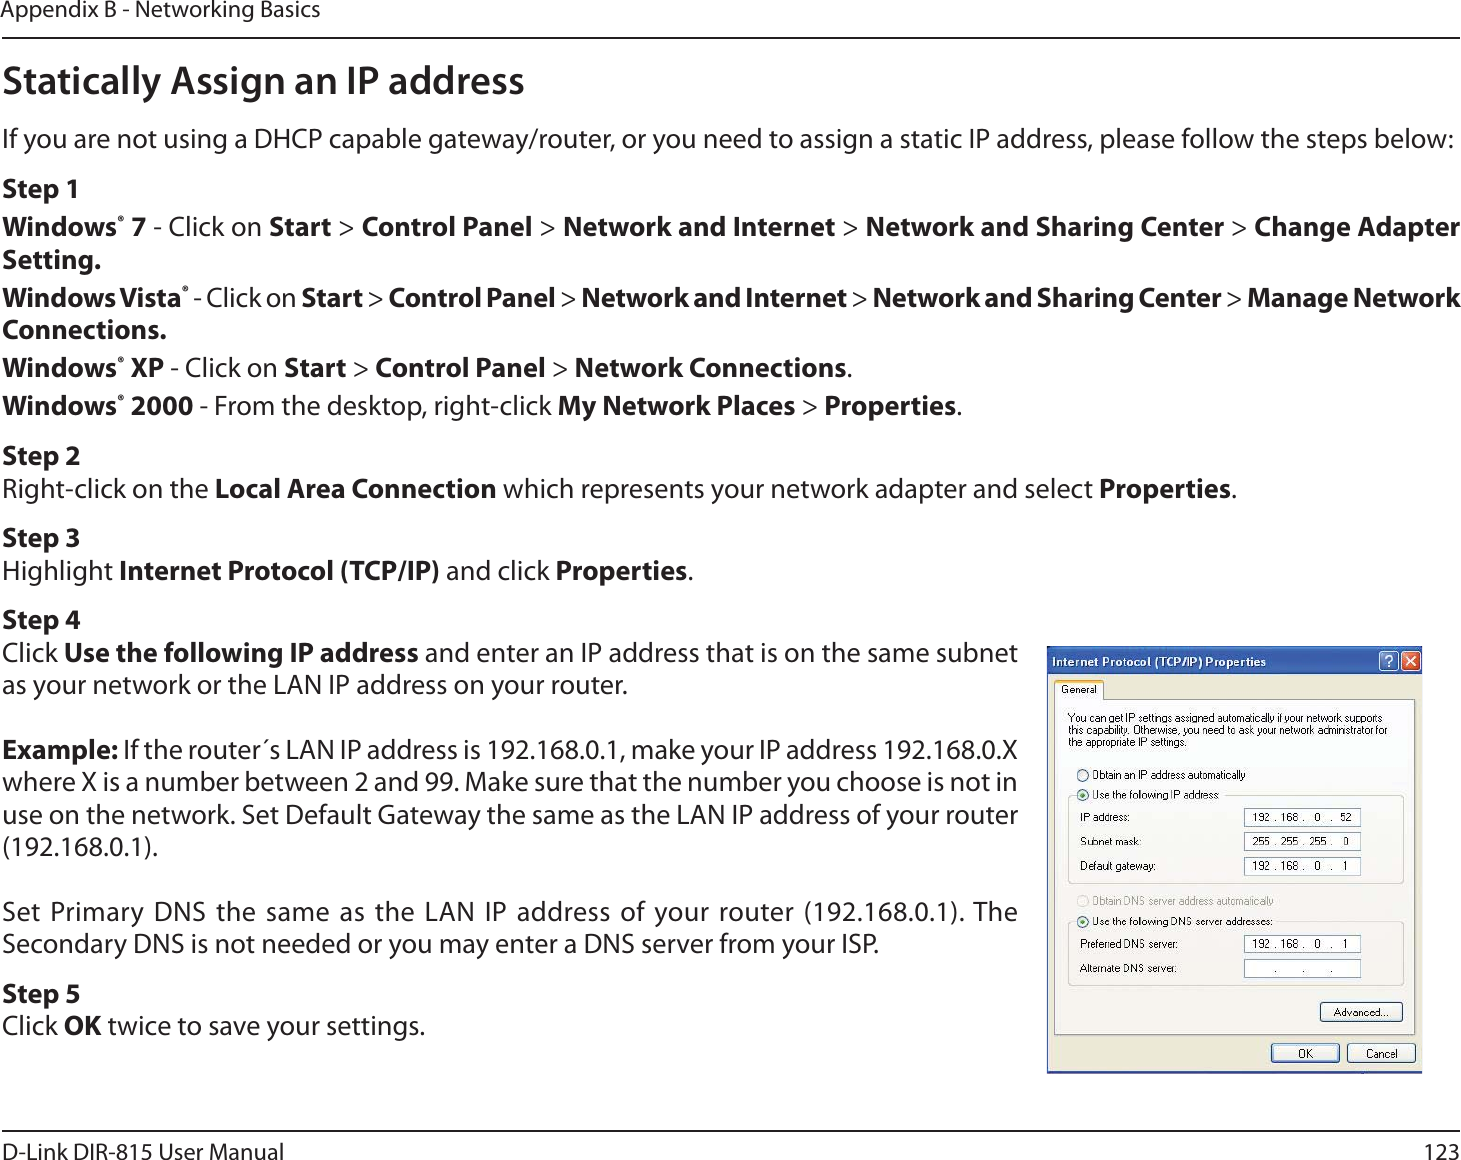 123D-Link DIR-815 User ManualAppendix B - Networking BasicsStatically Assign an IP addressIf you are not using a DHCP capable gateway/router, or you need to assign a static IP address, please follow the steps below:Step 1Windows® 7 - Click on Start &gt; Control Panel &gt; Network and Internet &gt; Network and Sharing Center &gt; Change Adapter Setting. Windows Vista® - Click on Start &gt; Control Panel &gt; Network and Internet &gt; Network and Sharing Center &gt; Manage Network Connections.Windows® XP - Click on Start &gt; Control Panel &gt; Network Connections.Windows® 2000 - From the desktop, right-click My Network Places &gt; Properties.Step 2Right-click on the Local Area Connection which represents your network adapter and select Properties.Step 3Highlight Internet Protocol (TCP/IP) and click Properties.Step 4Click Use the following IP address and enter an IP address that is on the same subnet as your network or the LAN IP address on your router.Example: If the router´s LAN IP address is 192.168.0.1, make your IP address 192.168.0.X where X is a number between 2 and 99. Make sure that the number you choose is not in use on the network. Set Default Gateway the same as the LAN IP address of your router (192.168.0.1). Set Primary DNS the same as the LAN IP address of your router (192.168.0.1). The Secondary DNS is not needed or you may enter a DNS server from your ISP.Step 5Click OK twice to save your settings.